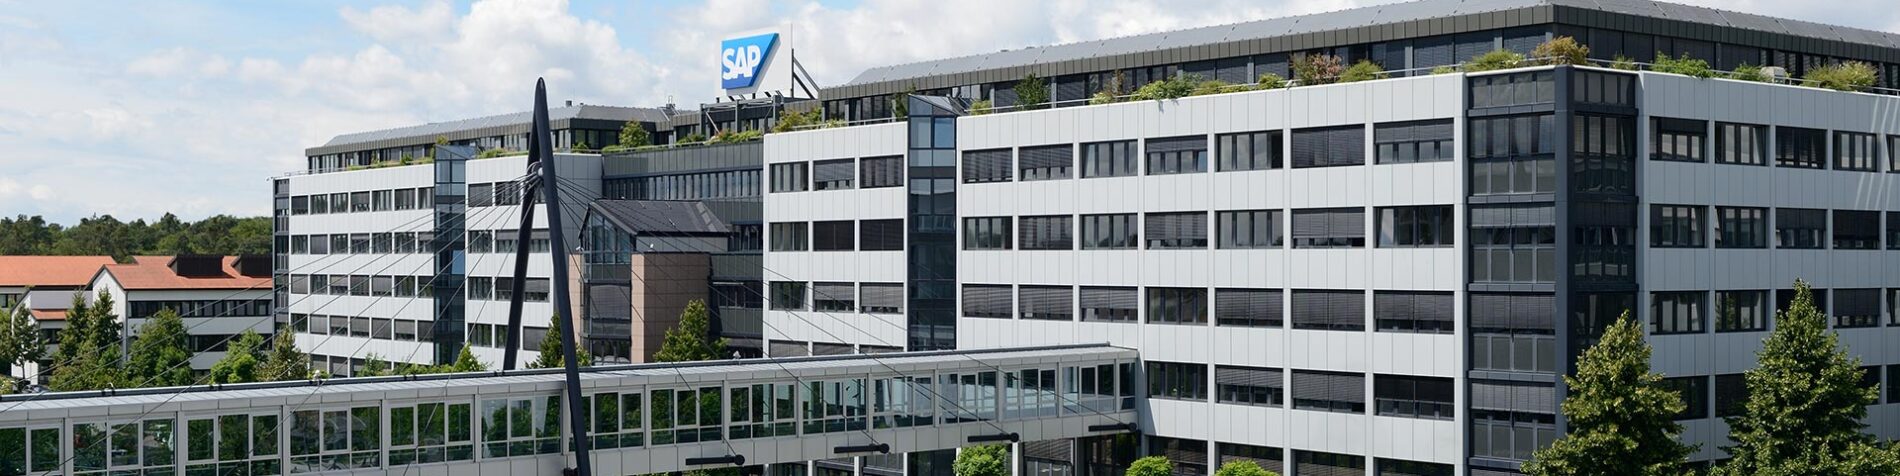 SAP Promotes Proven Leaders to Strengthen the Company